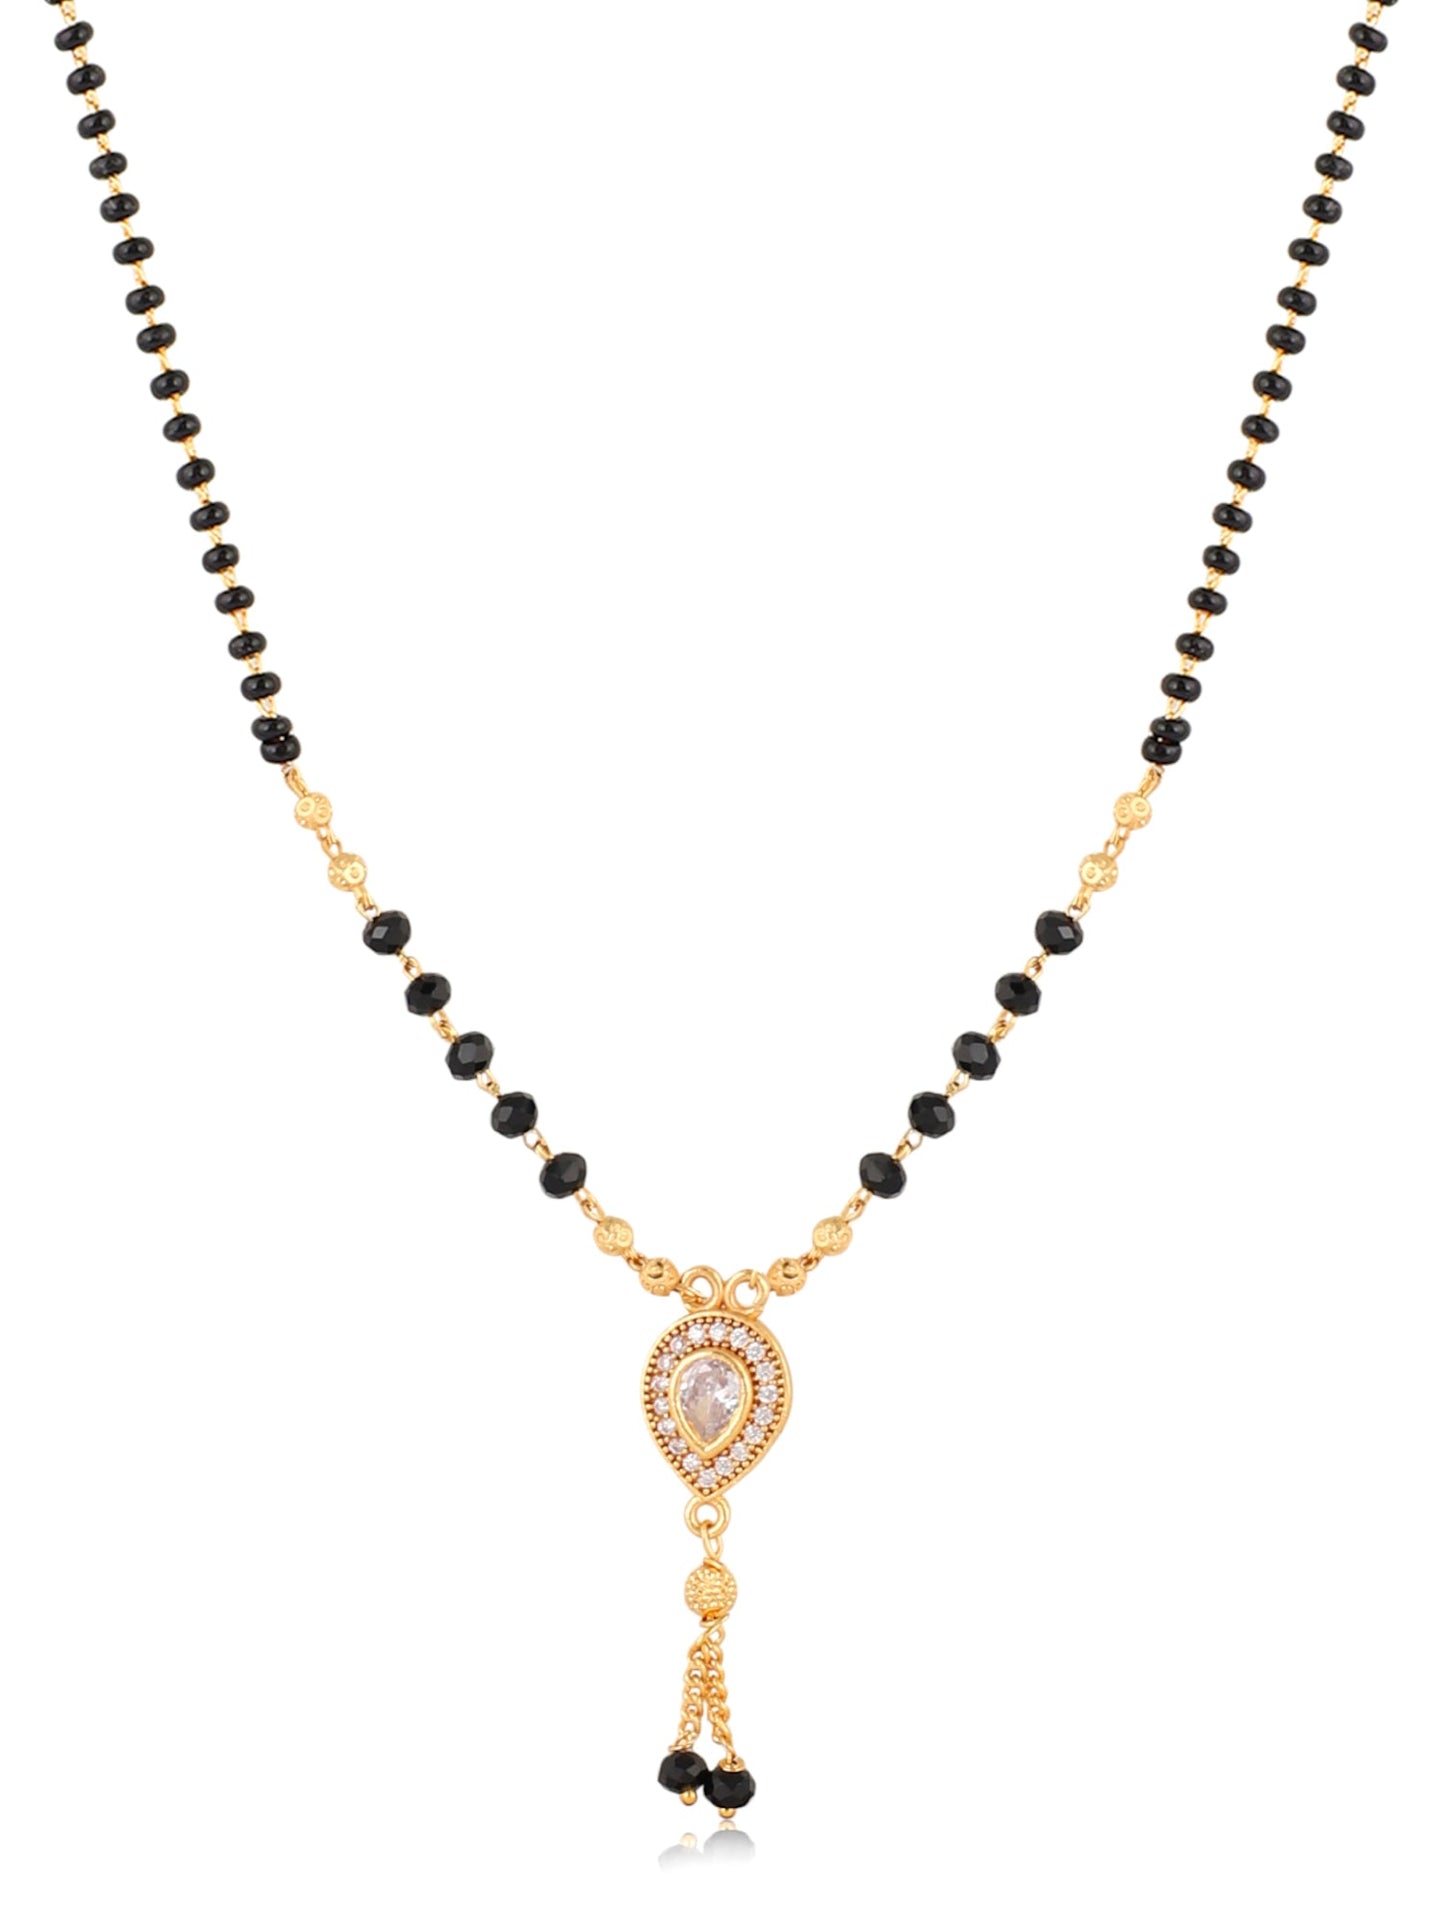 Mekkna Presents Traditional Gold Plated Mangalsutra for Women | Buy This Mangalsutra Online from Mekkna